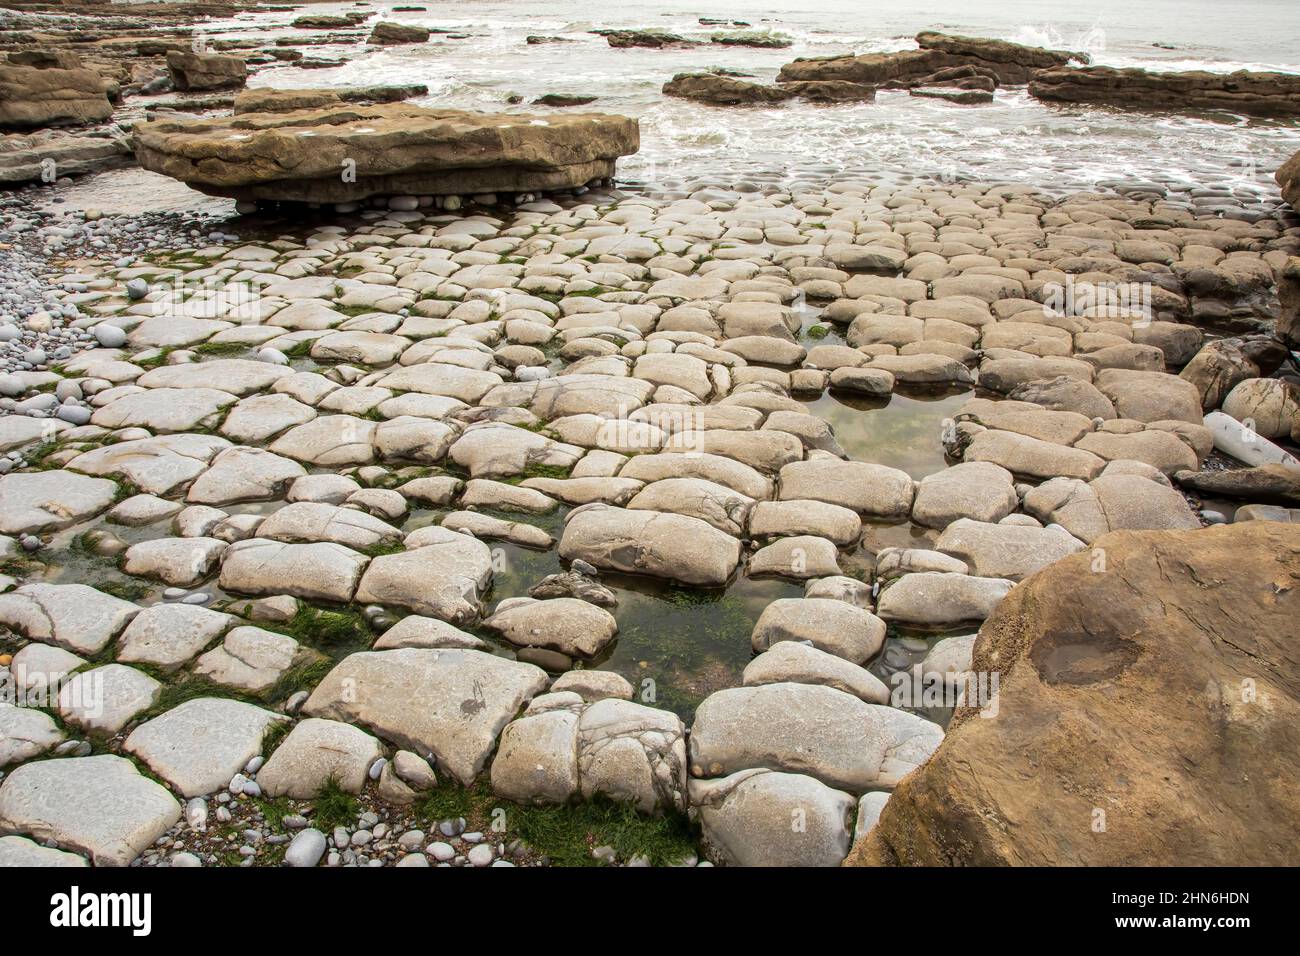 Geological coastal structures of nature, showing the movement of land mass. Stock Photo